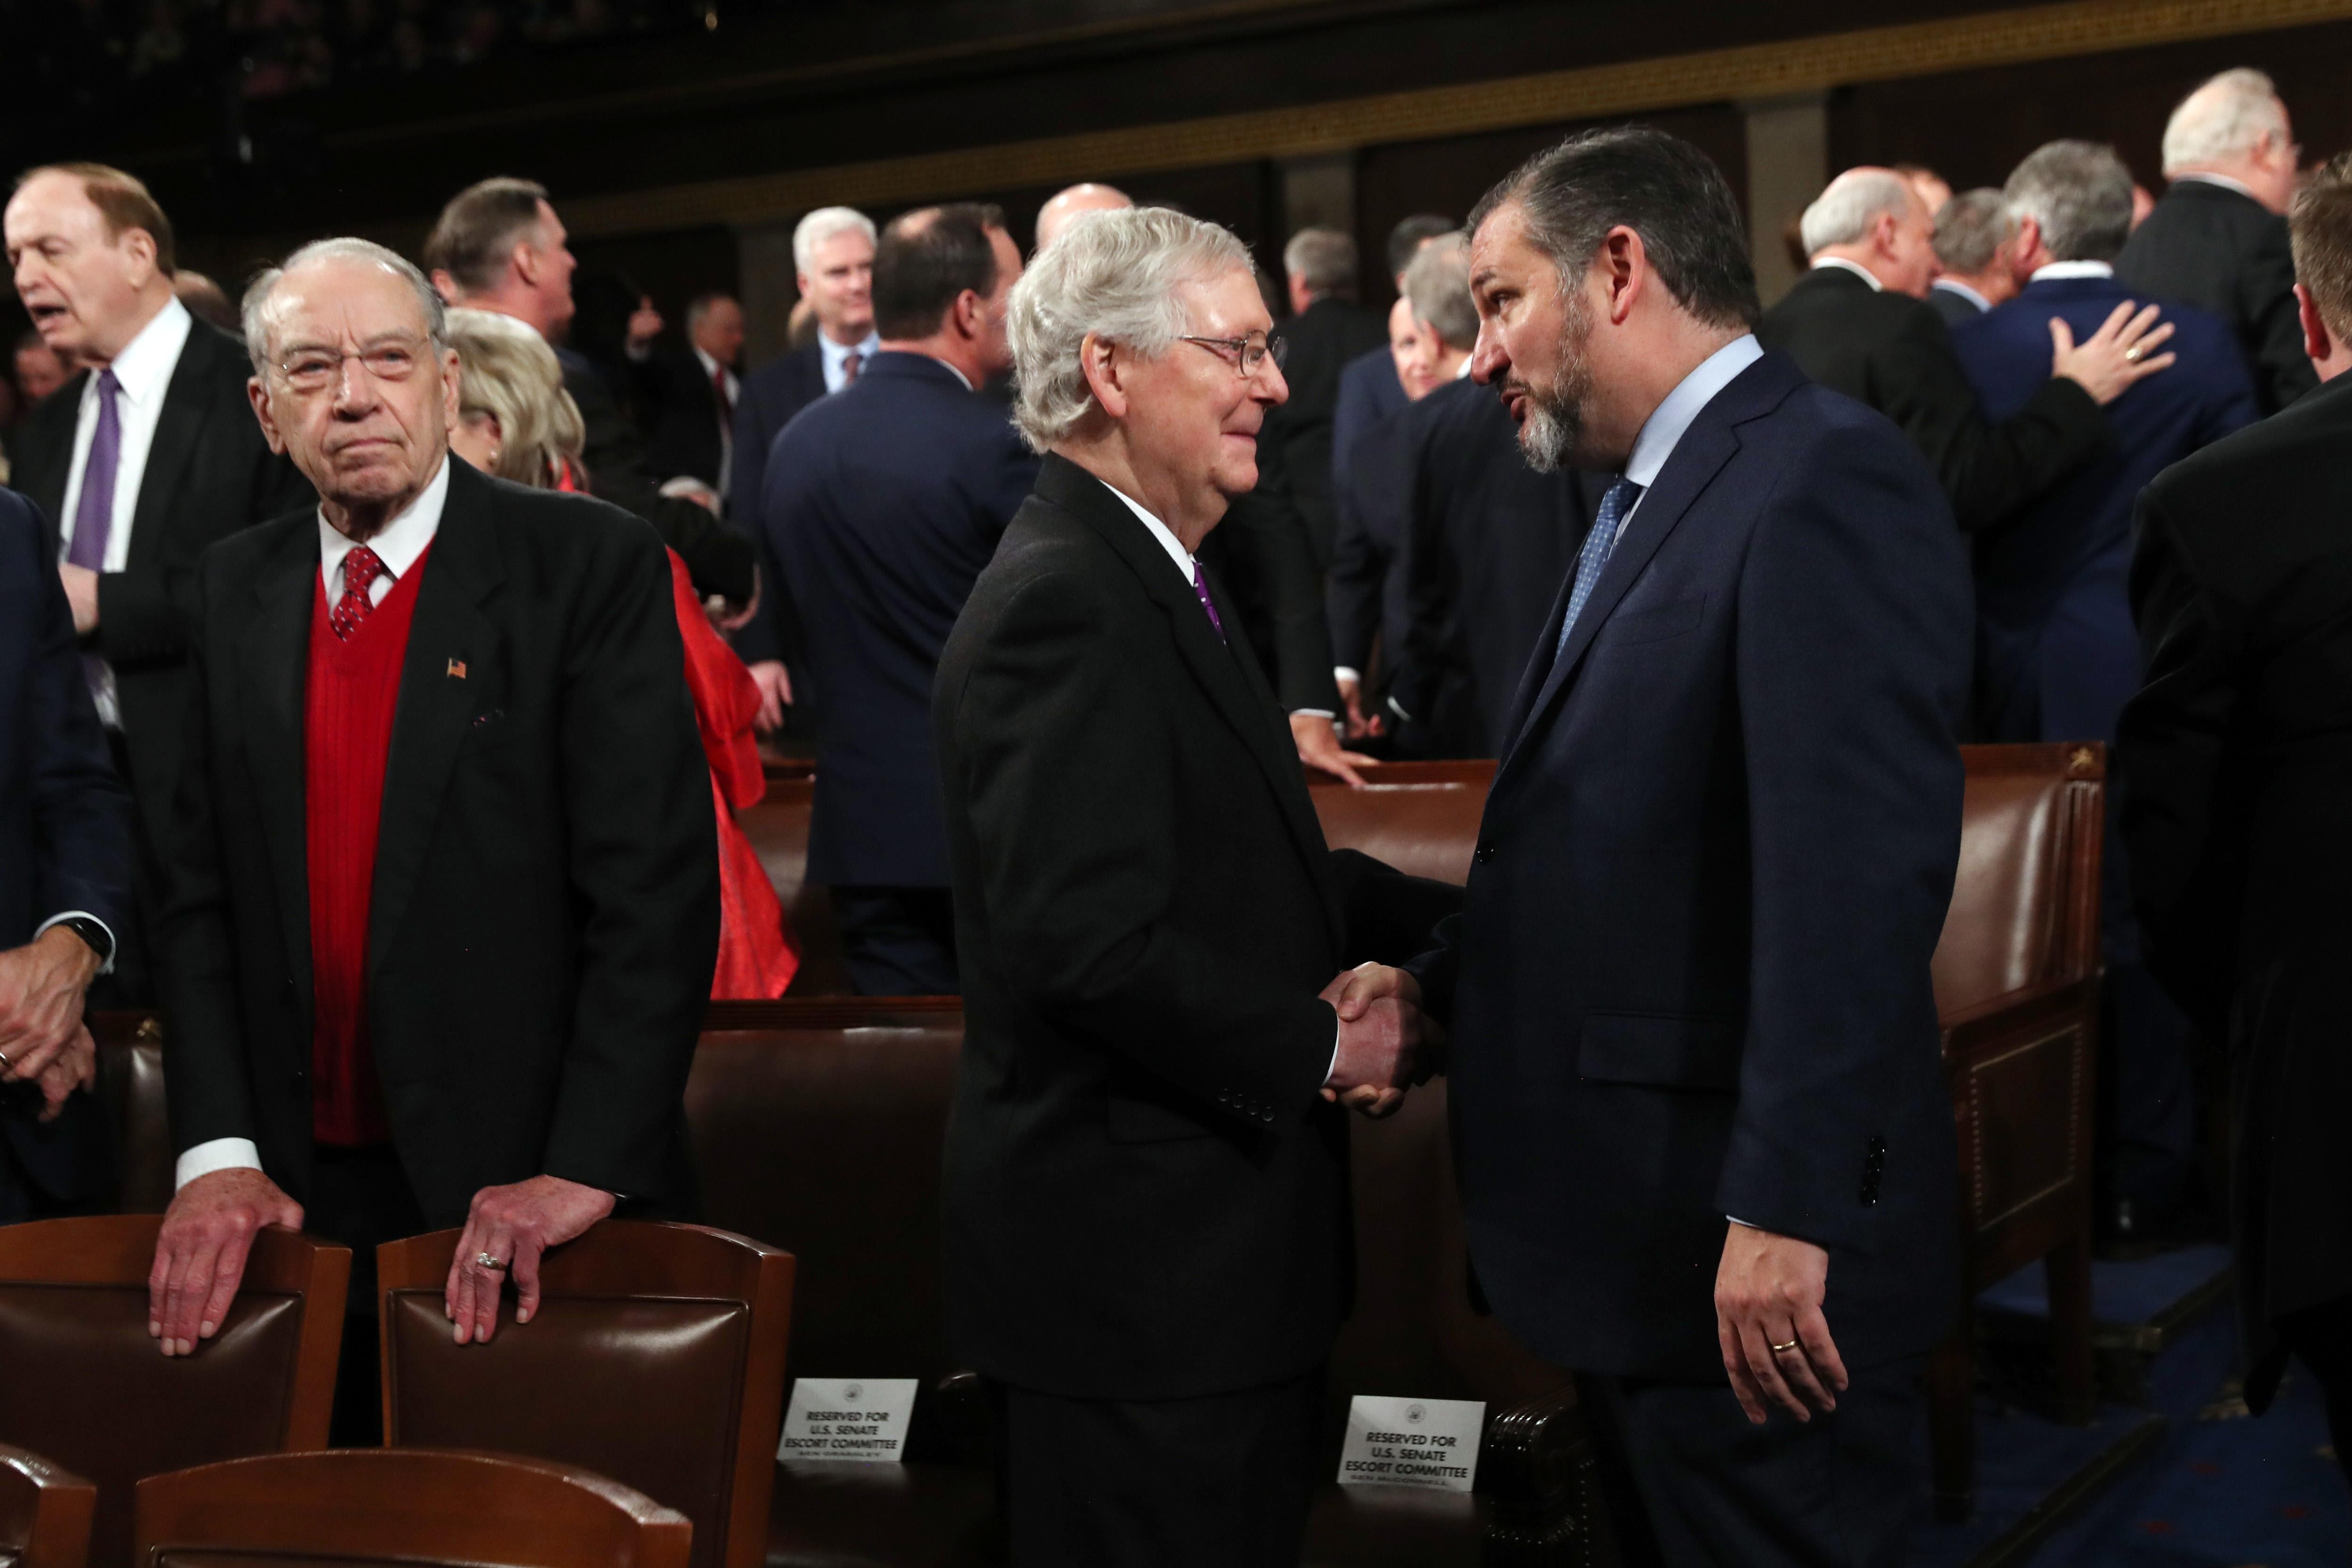 Mitch McConnell shakes hands with Ted Cruz as they stand among other senators on the floor of the House